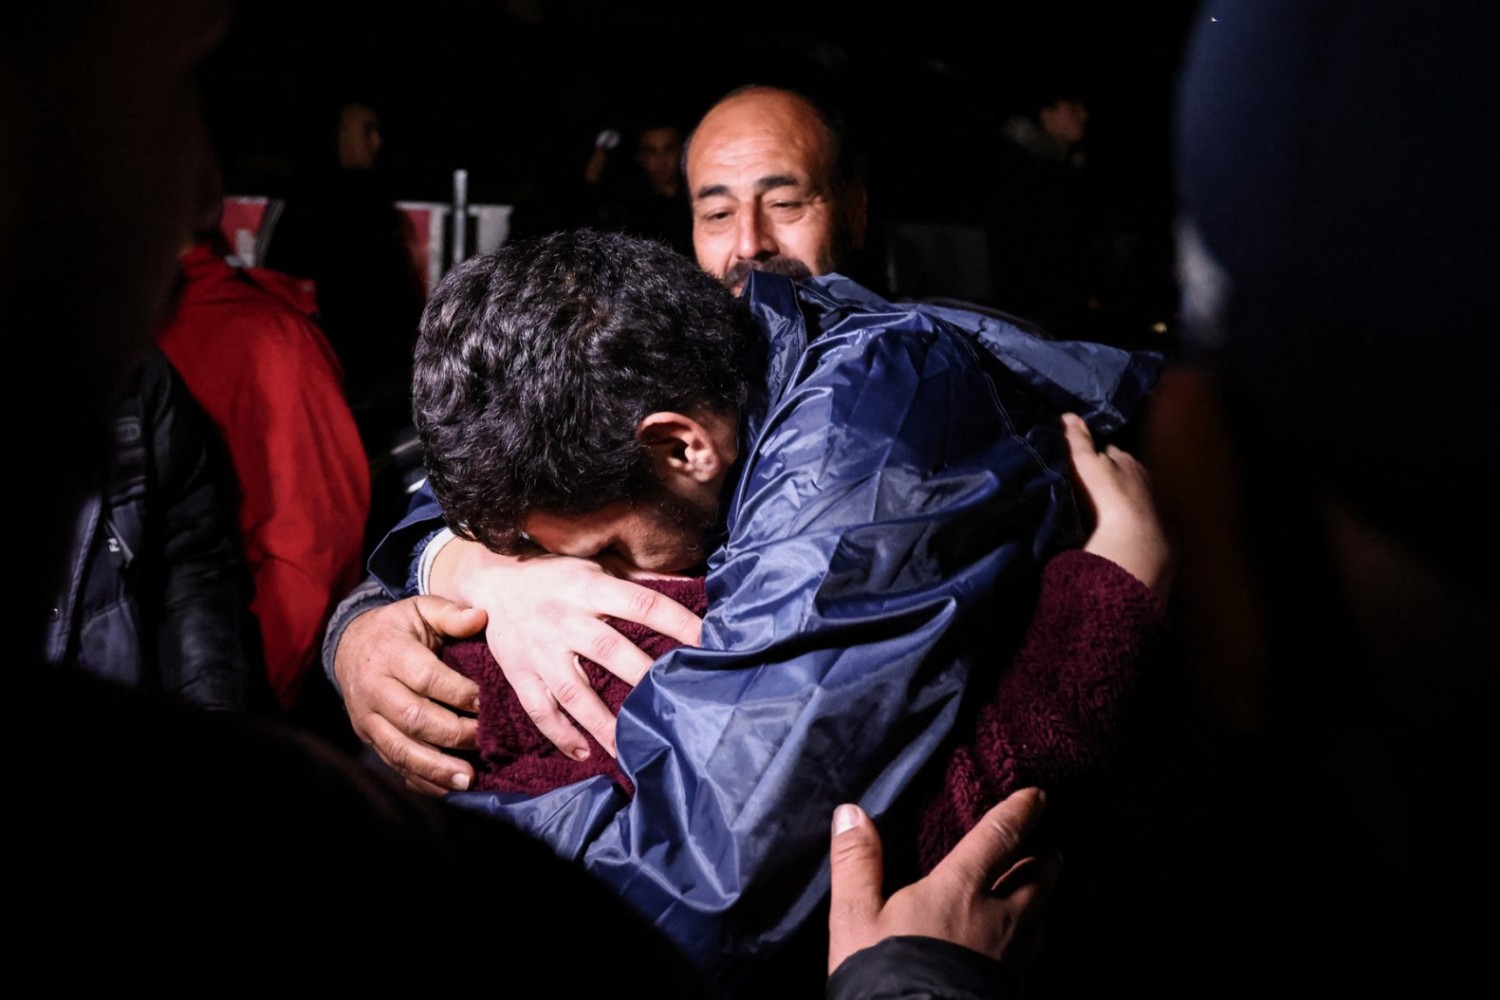 A Palestinian prisoner hugs his relatives after being released from an Israeli jail in exchange for Israeli hostages. KENZO TRIBOUILLARD/AFP/GETTY IMAGES